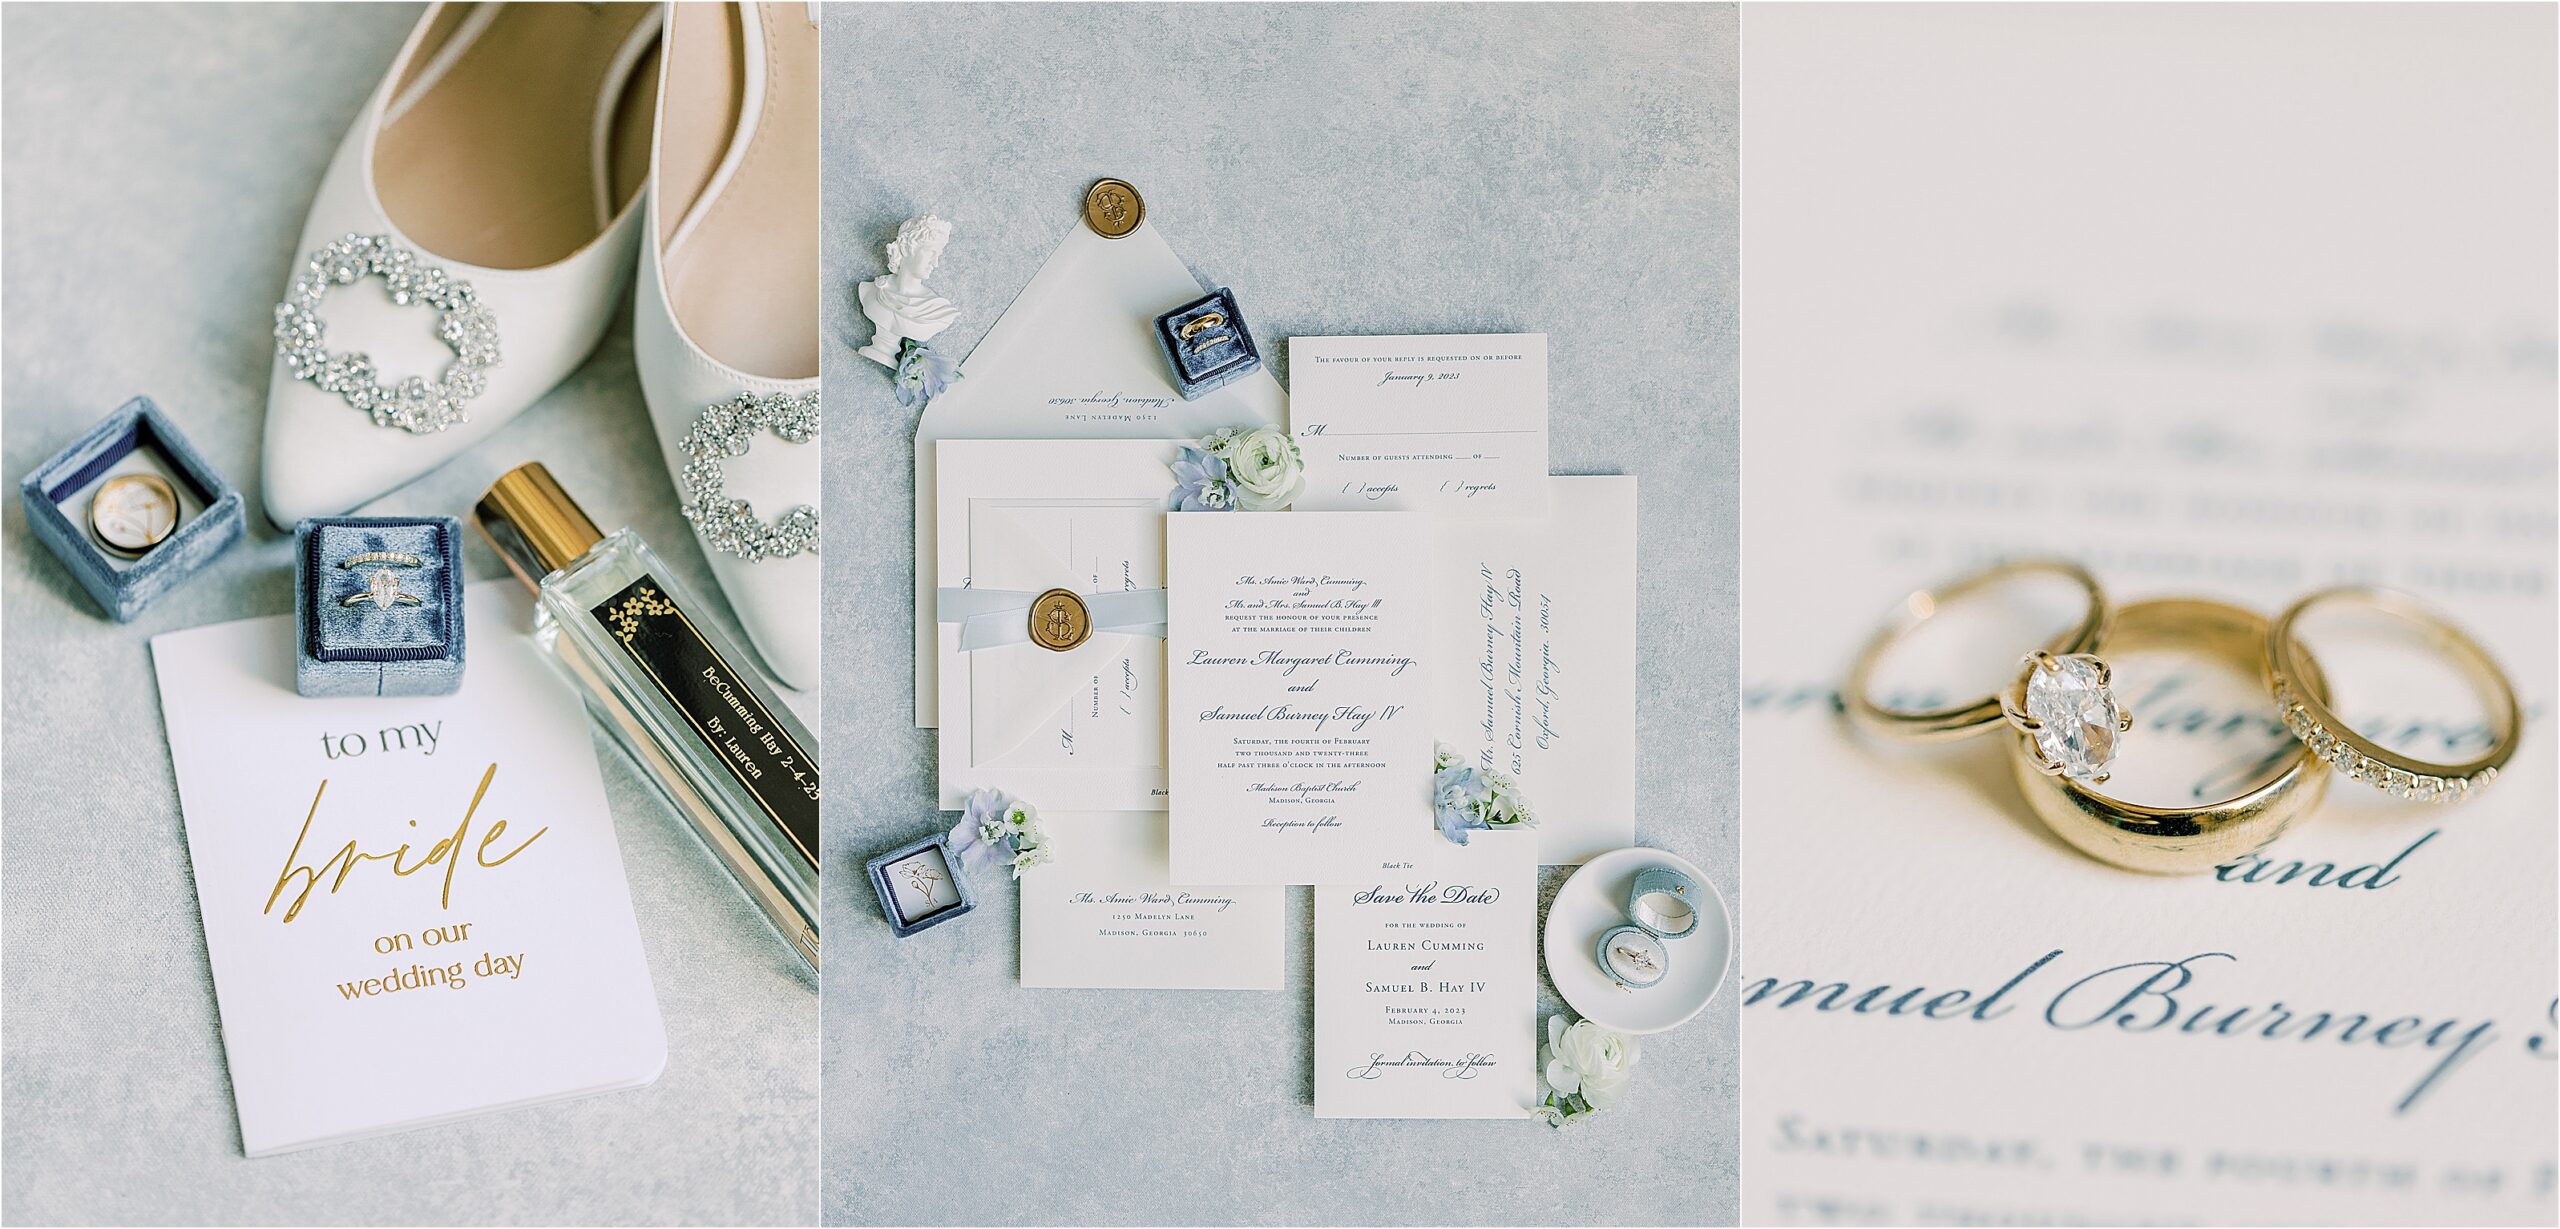 White invitation suit on a blue backdrop with wedding rings on the letters.